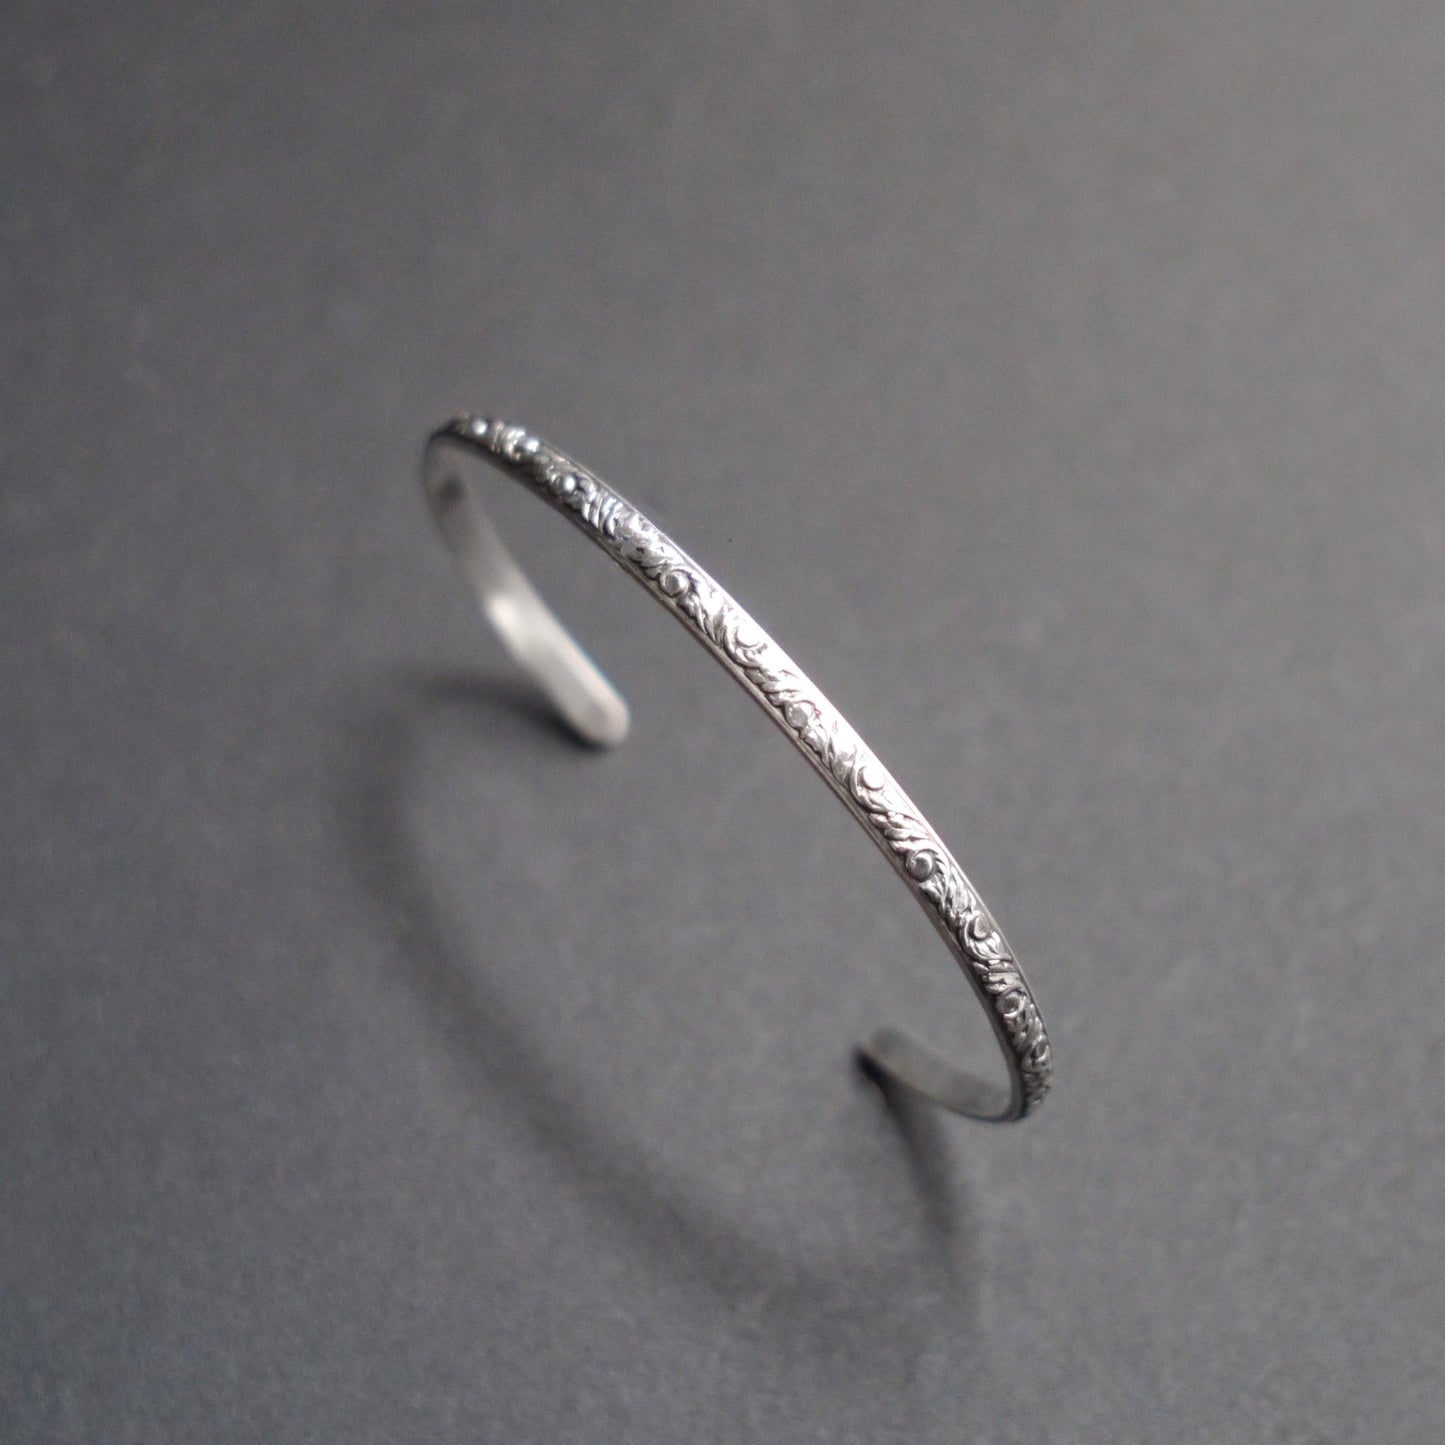 Floral Vine Cuff in 3mm Sterling Silver